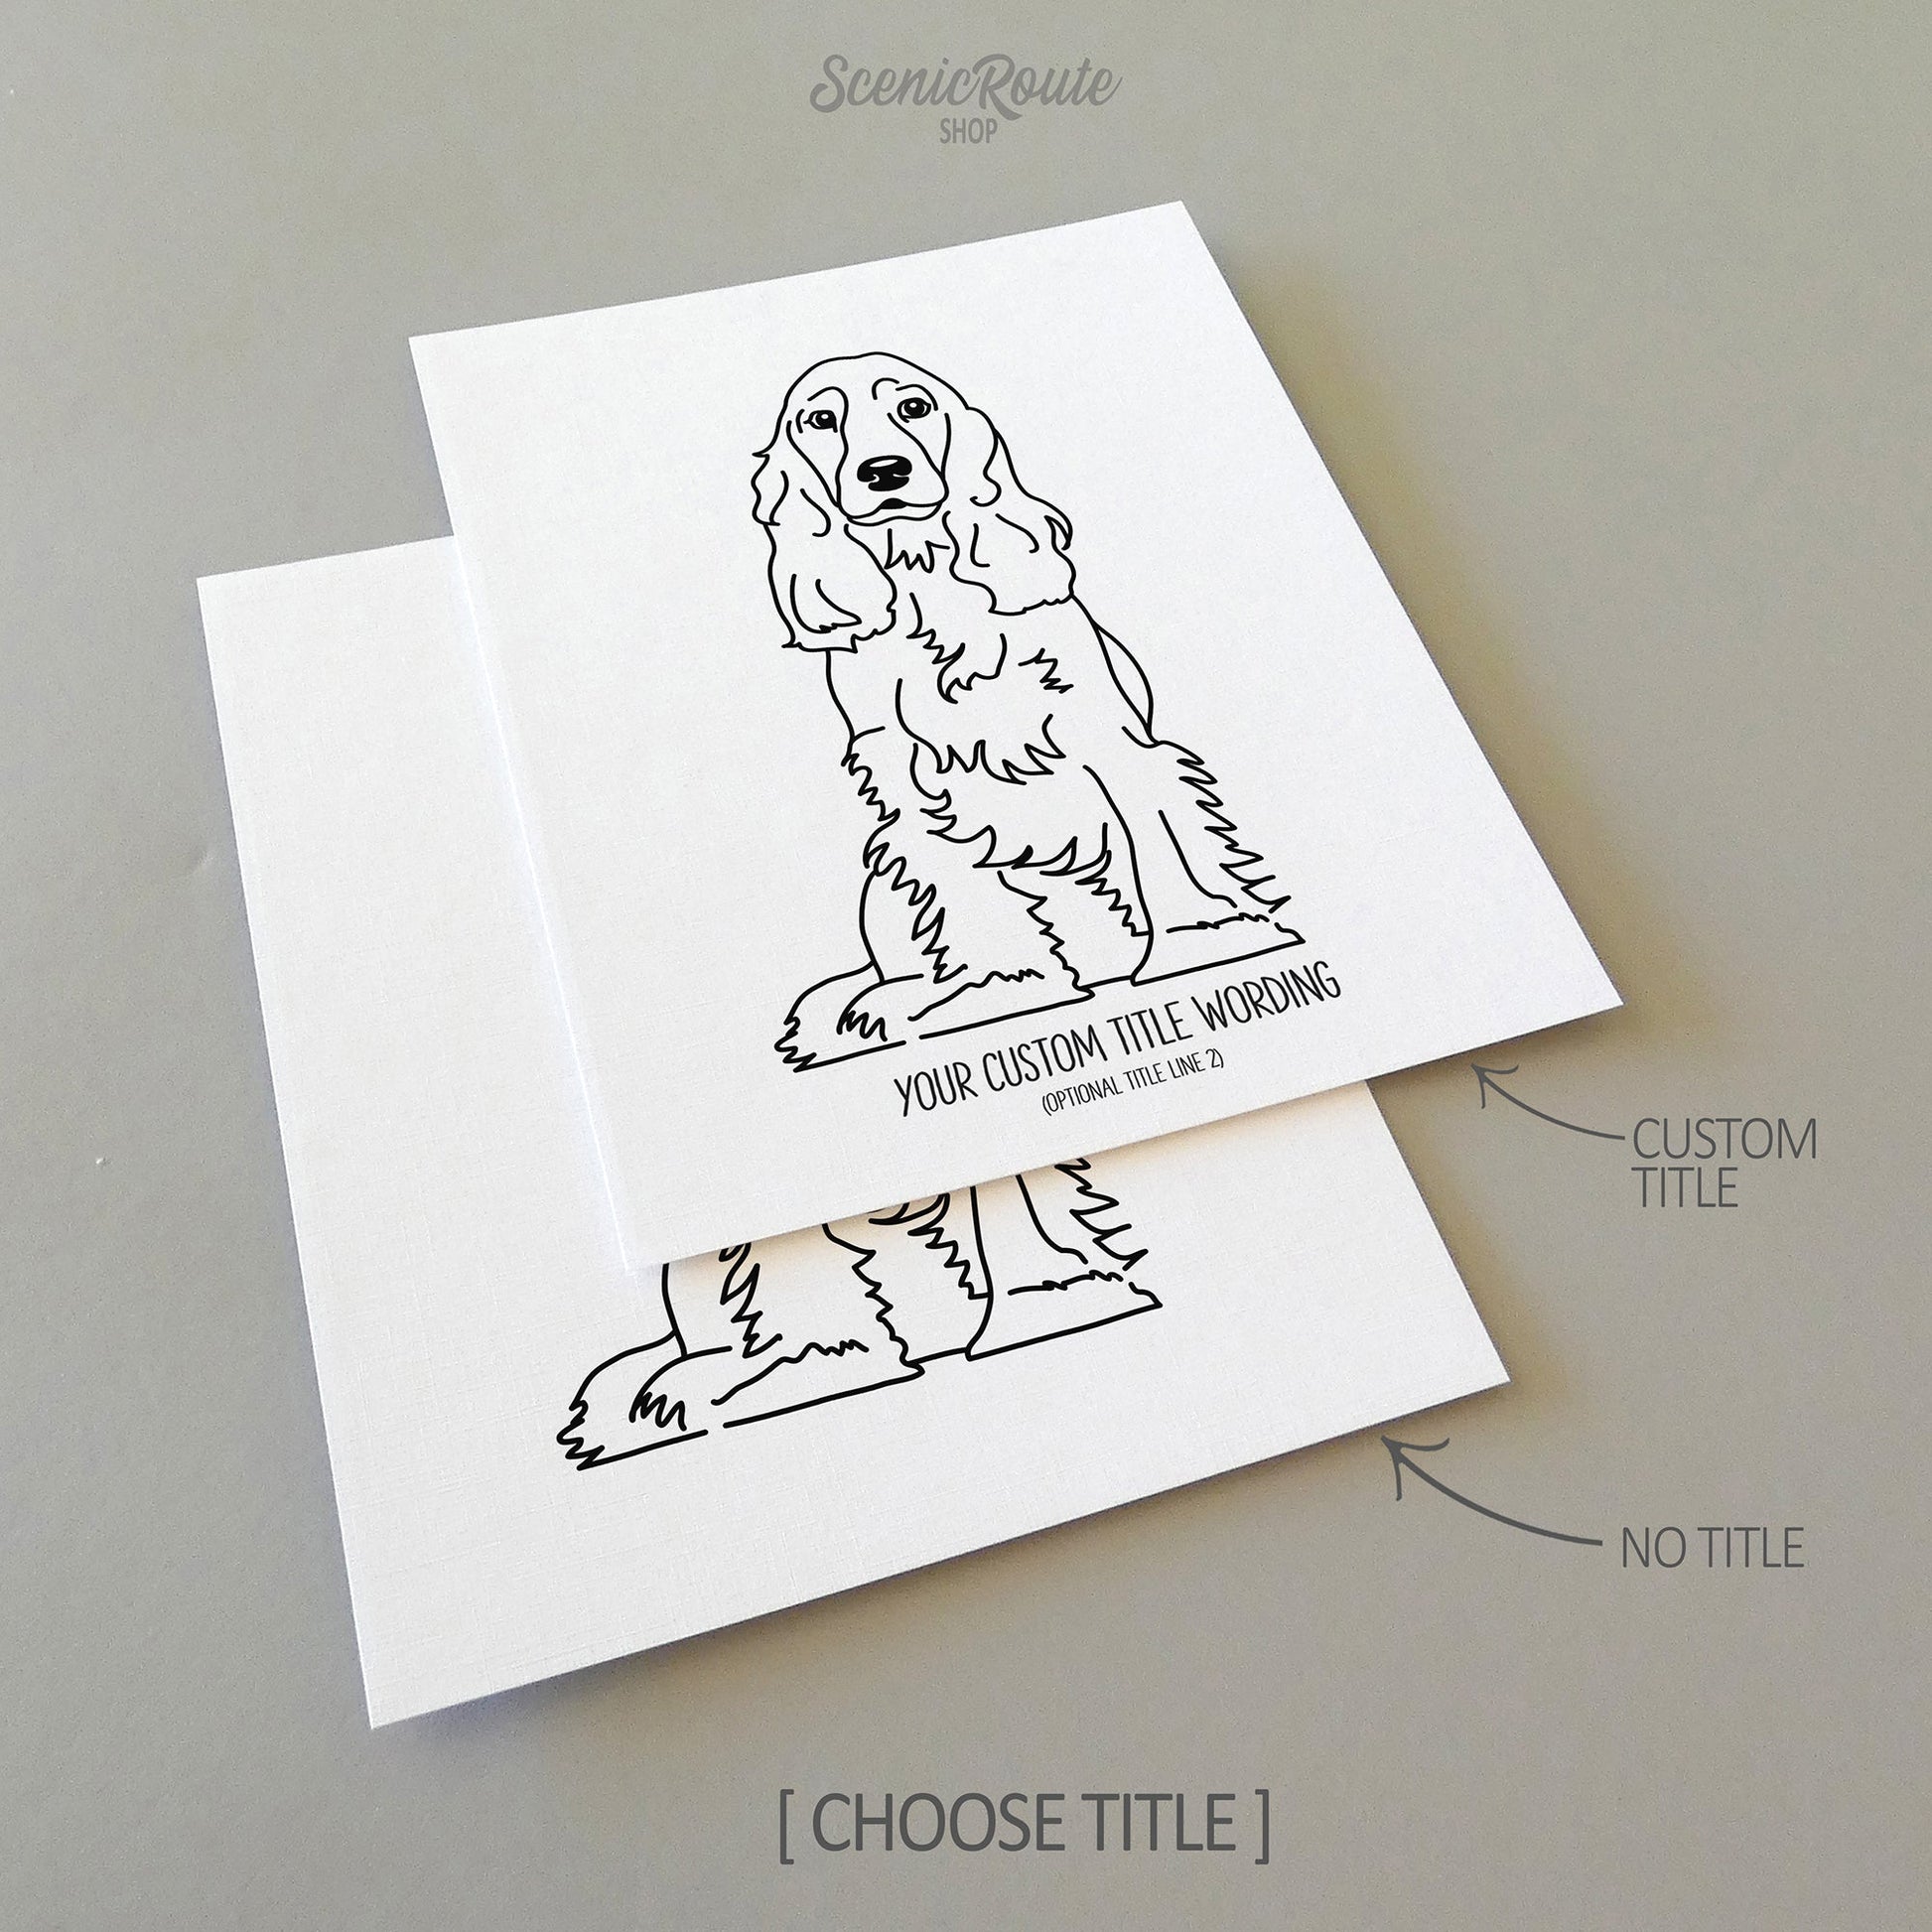 Two drawings of a Cocker Spaniel dog on white linen paper with a gray background.  Pieces are shown with “No Title” and “Custom Title” options to illustrate the available art print options.